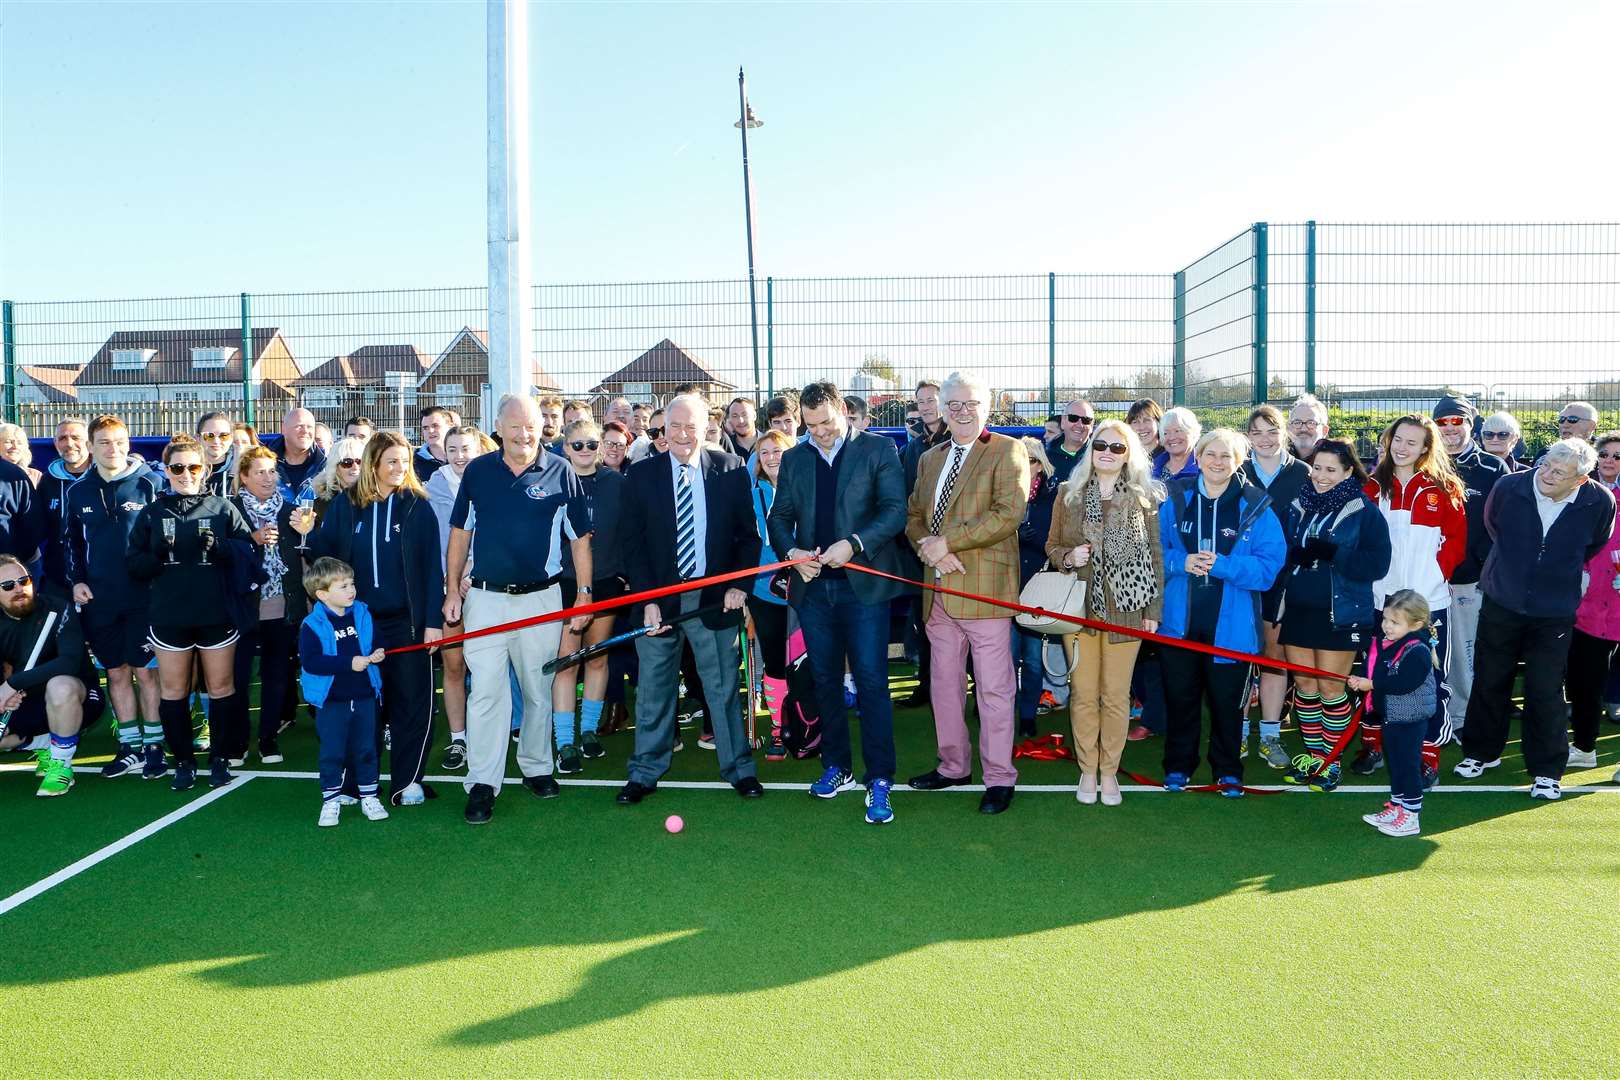 A ceremony was held in November 2018 to mark the opening of the hub's first pitches. Picture: Matt Bristow/mattbristow.net